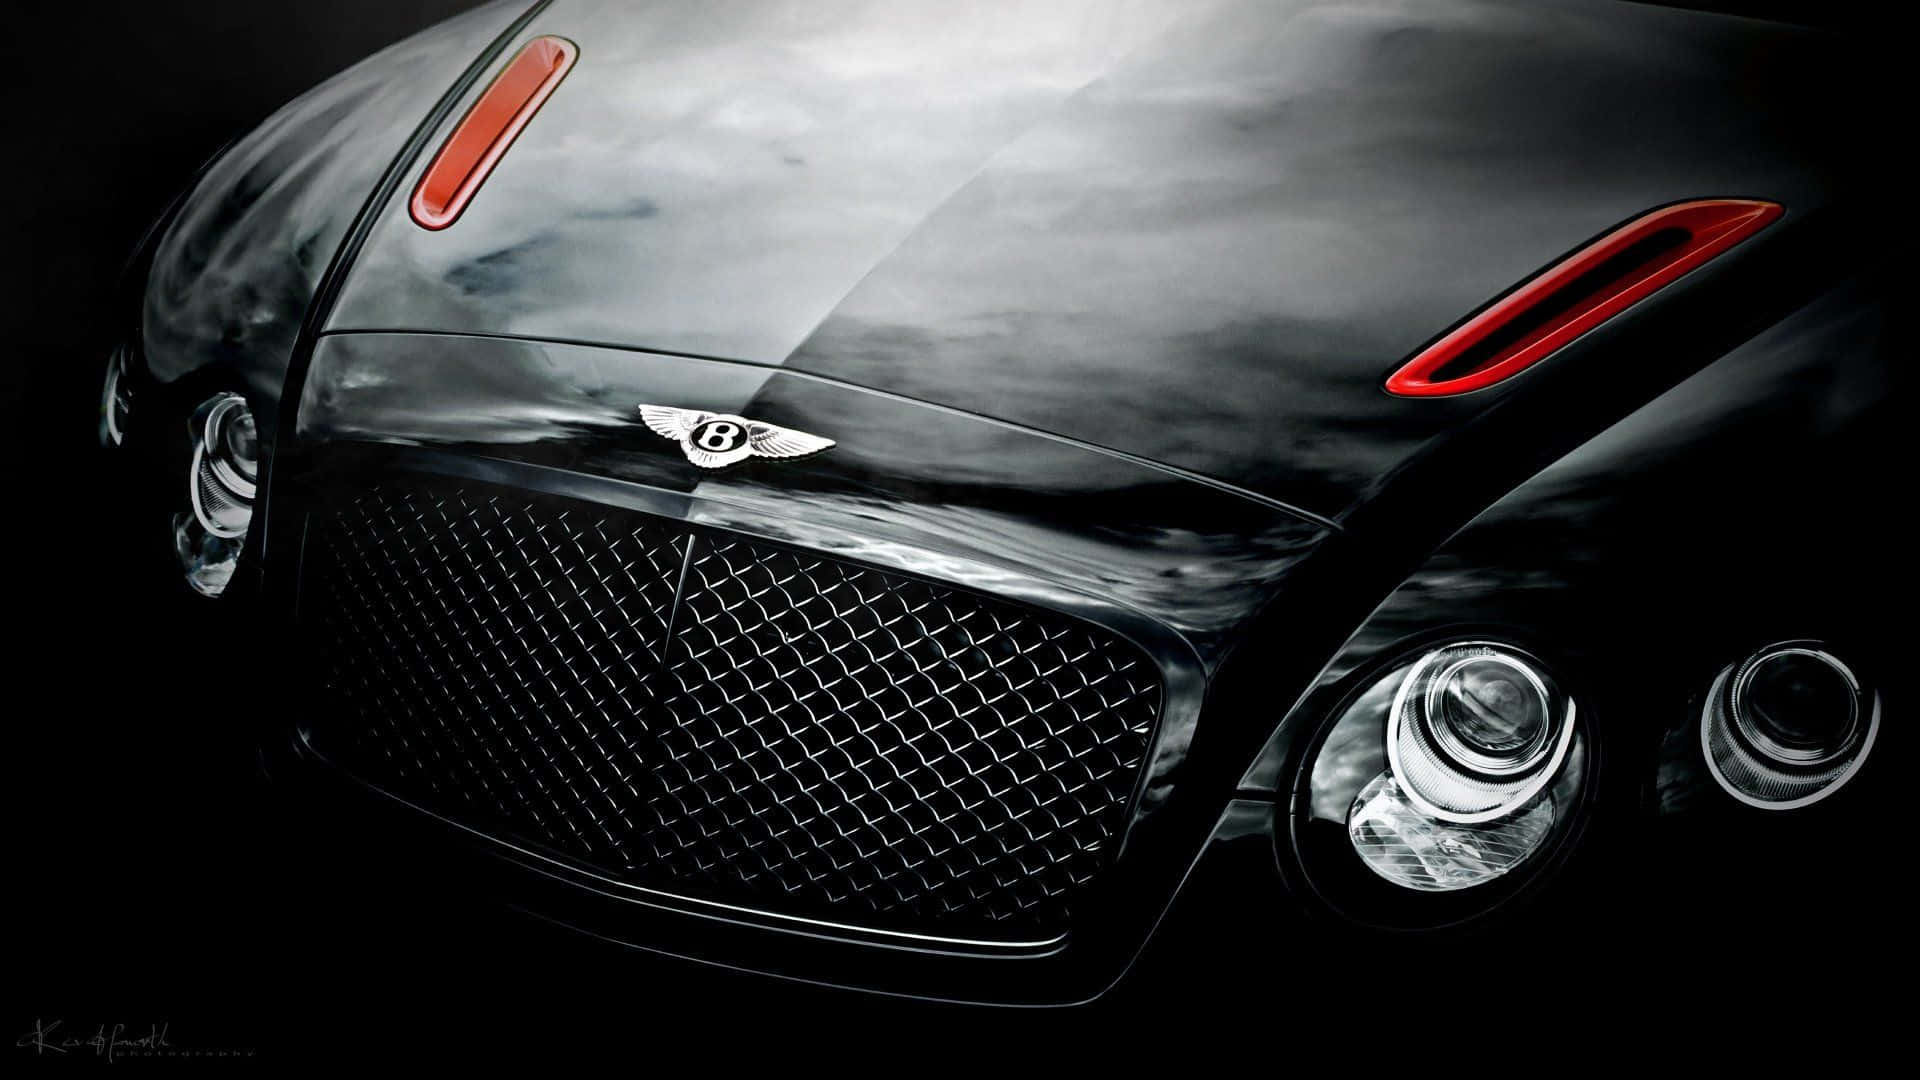 Luxury, craftmanship, and power prevelant in the Bentley supe car.